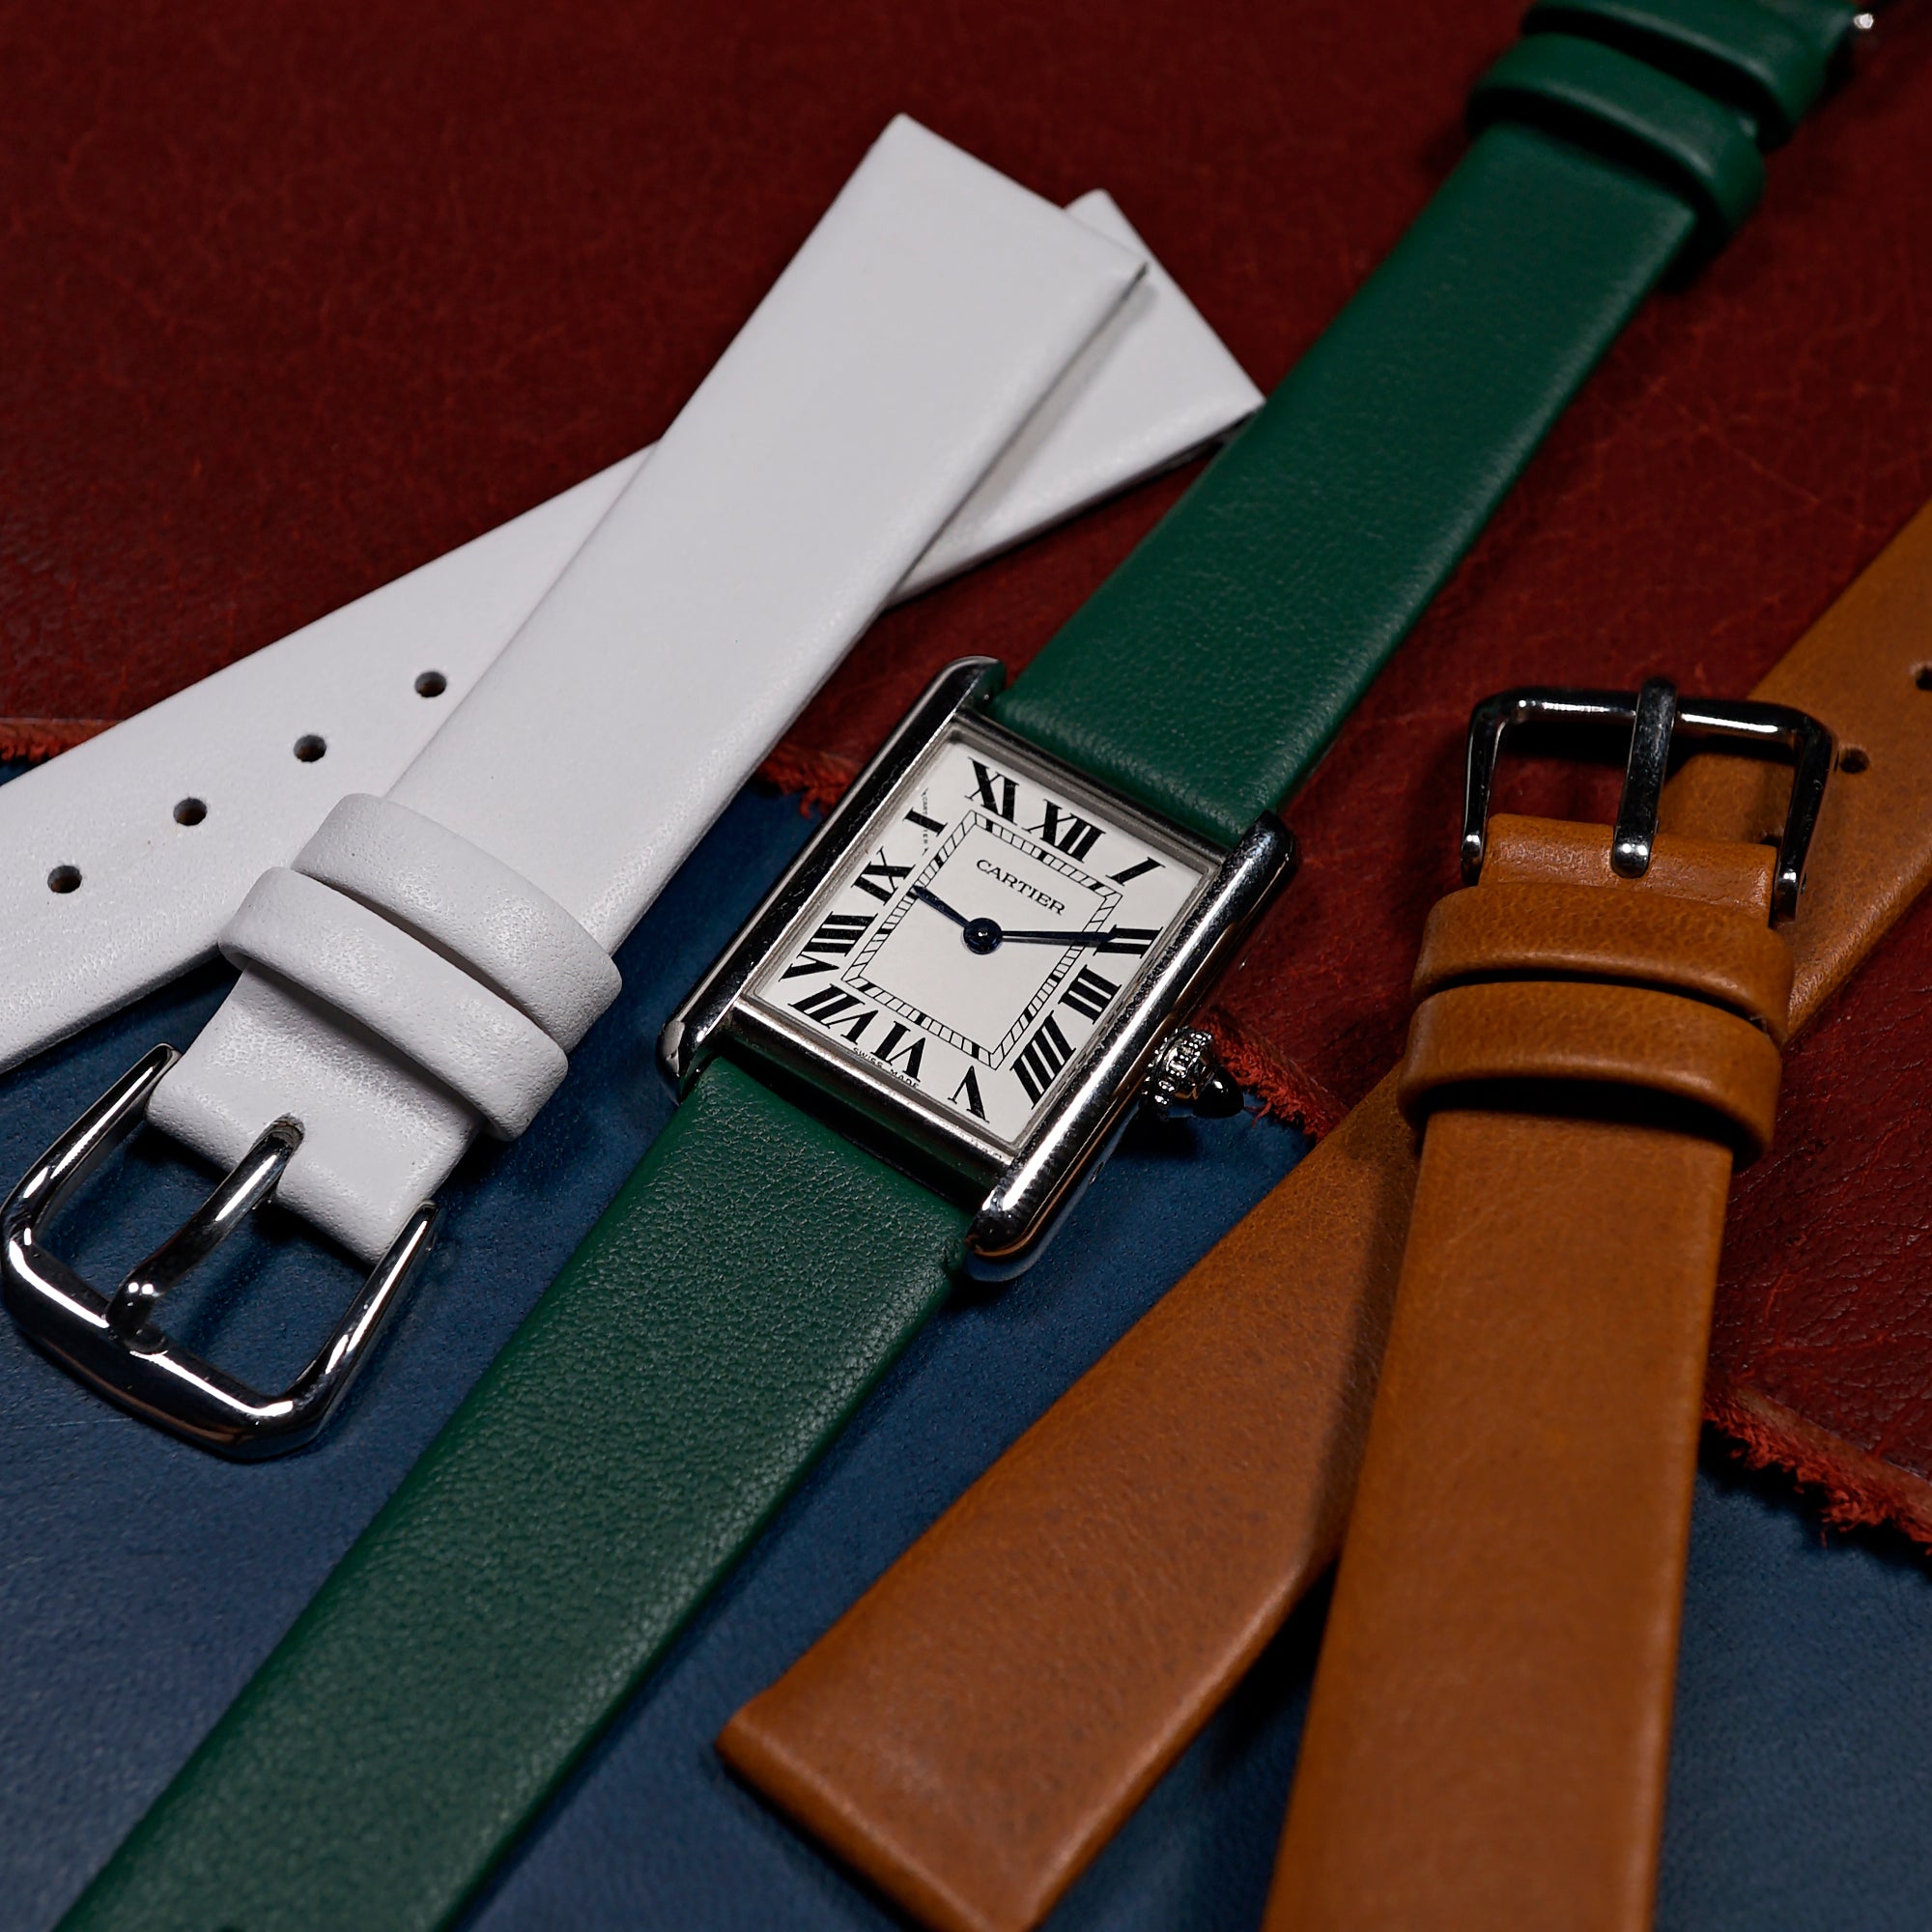 Unstitched Smooth Leather Watch Strap in Green - Nomad Watch Works MY